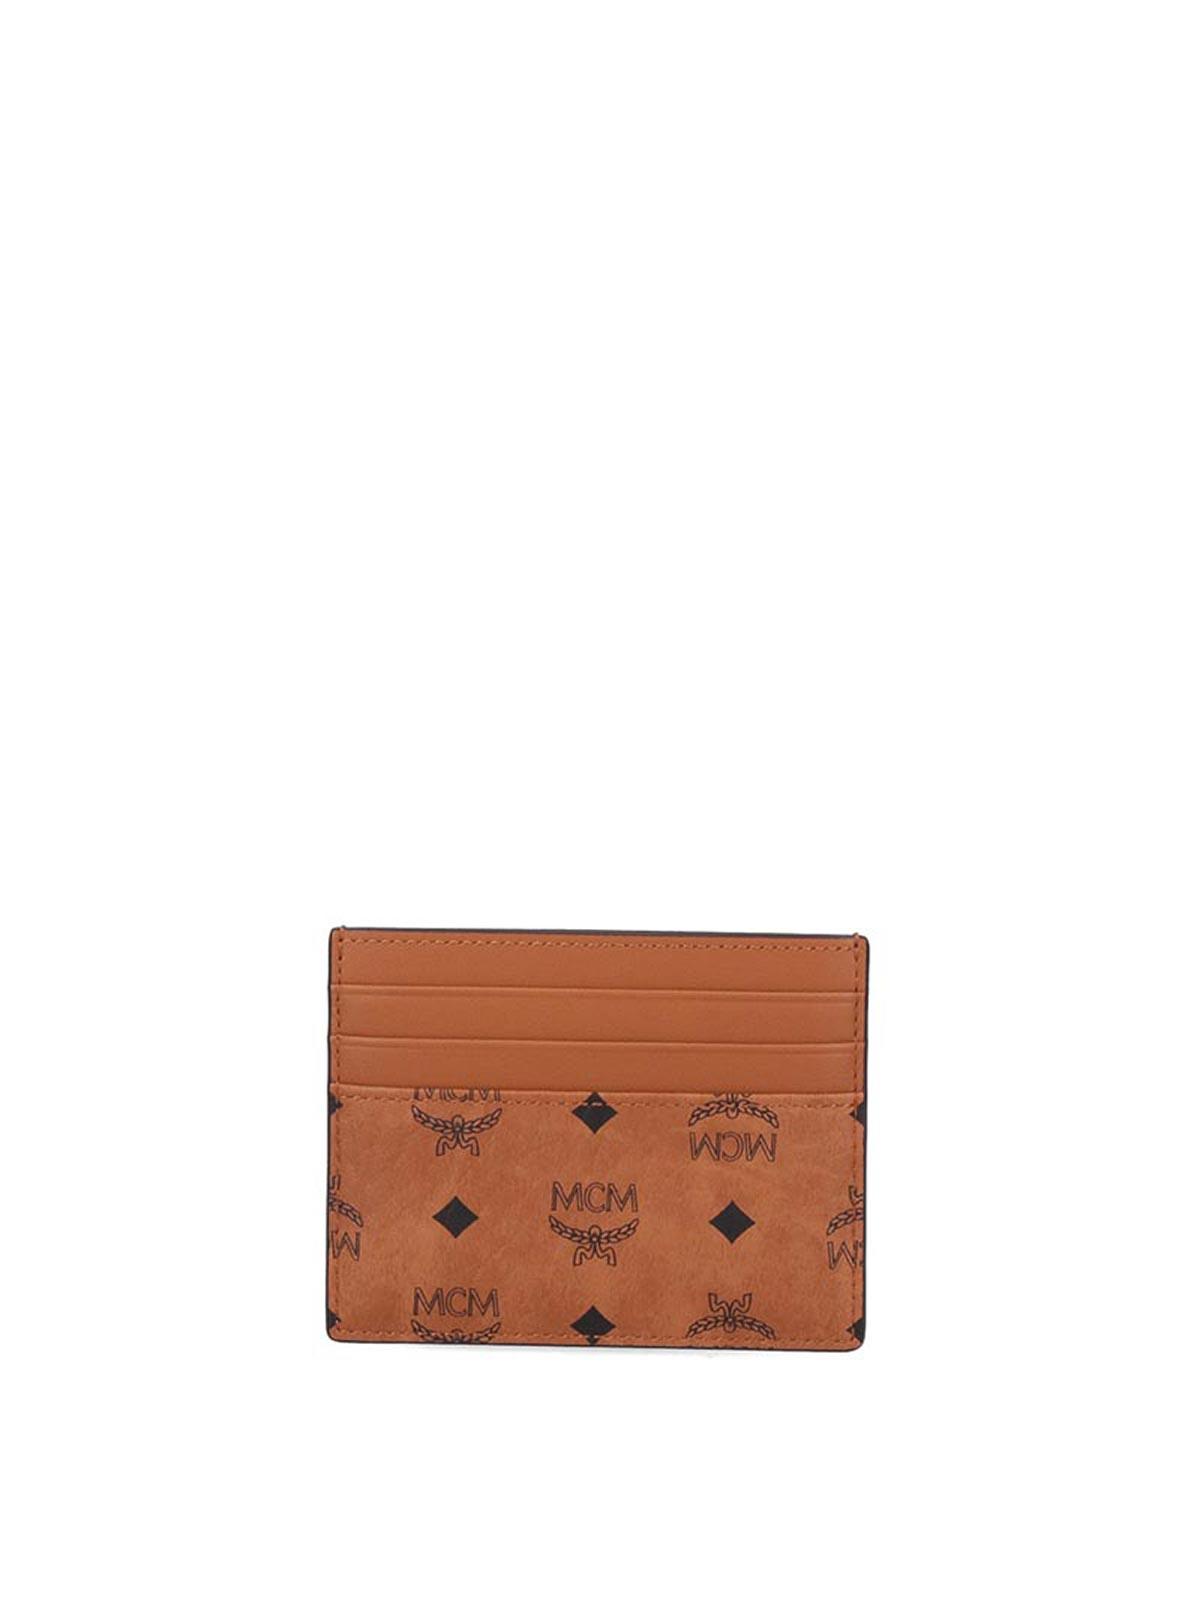 Mcm Card Holder With Money Clip Detail In Brown